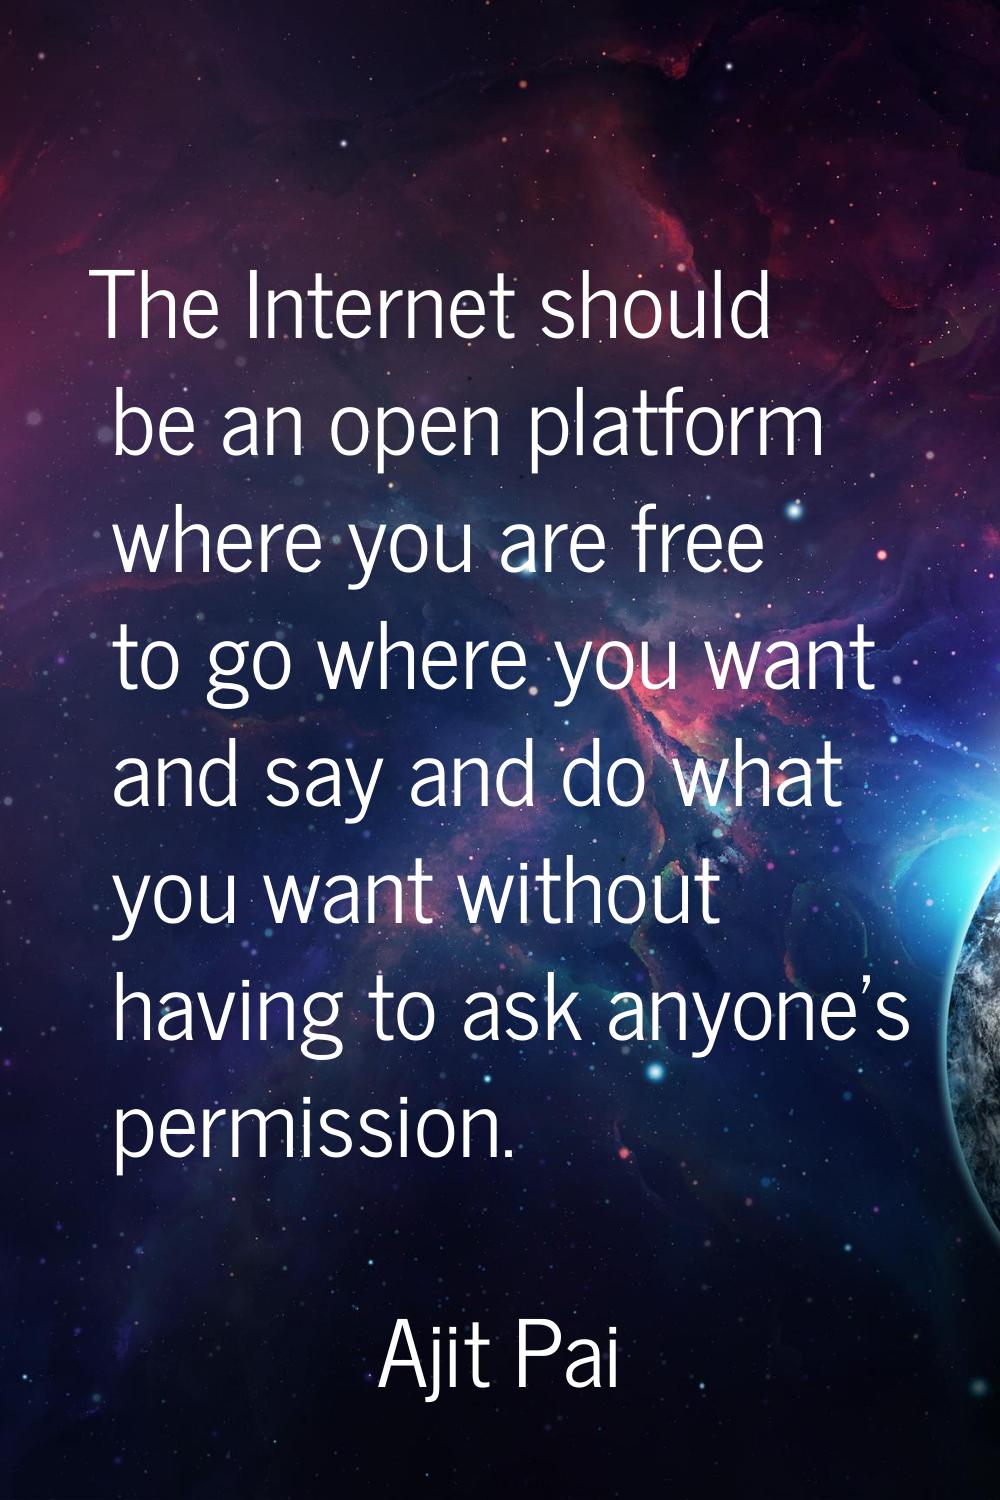 The Internet should be an open platform where you are free to go where you want and say and do what